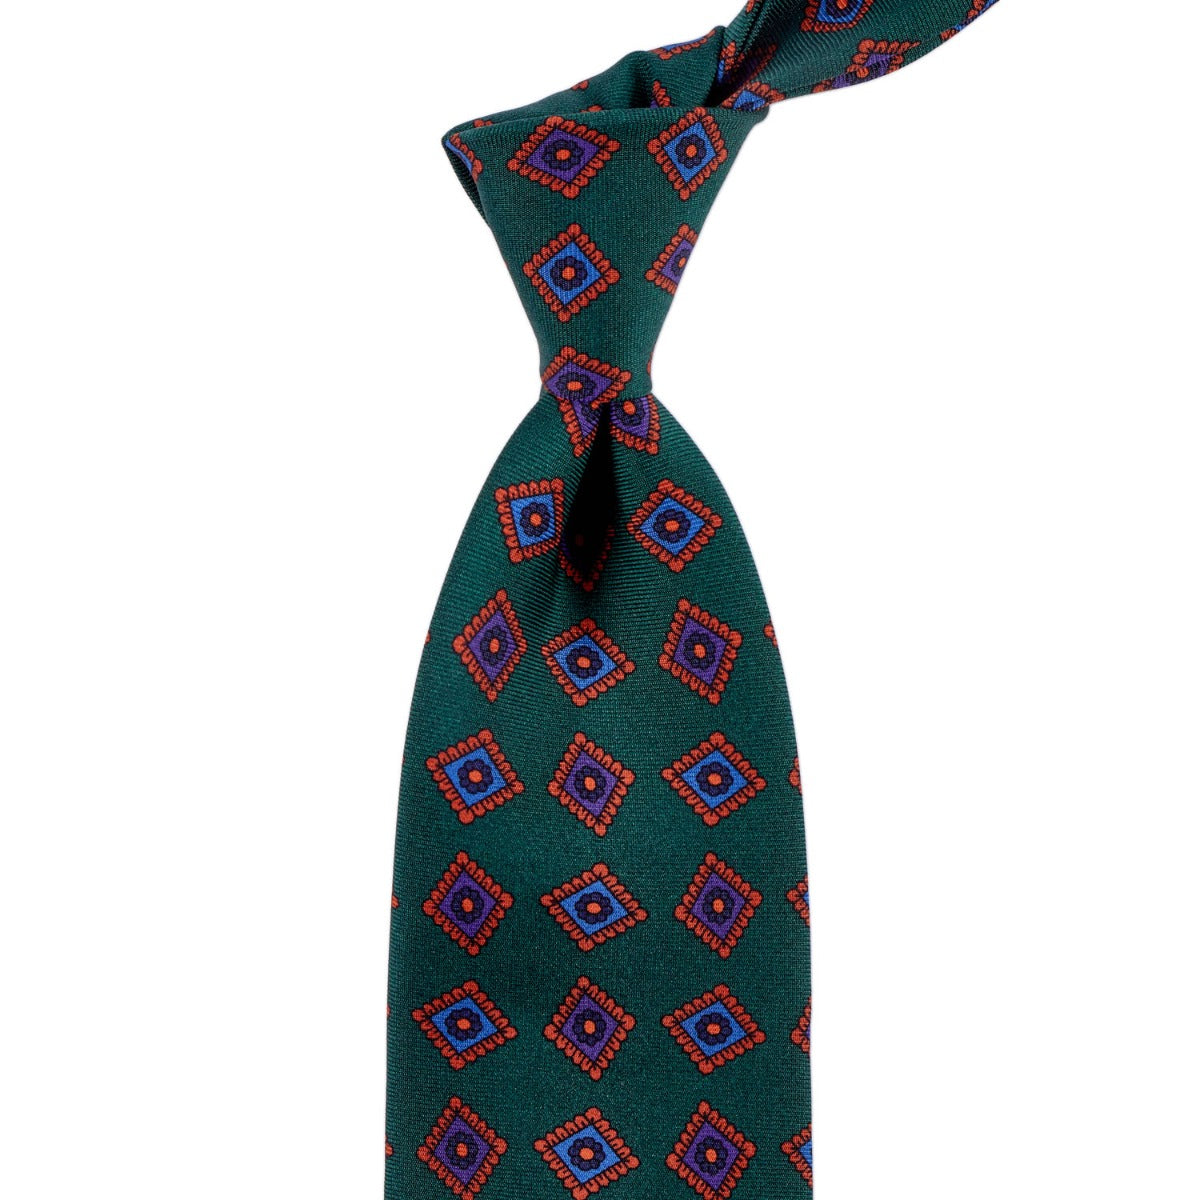 A Sovereign Grade Forrest Green Art Deco Ancient Madder Silk Tie from KirbyAllison.com of the highest quality with green, red and blue diamonds.